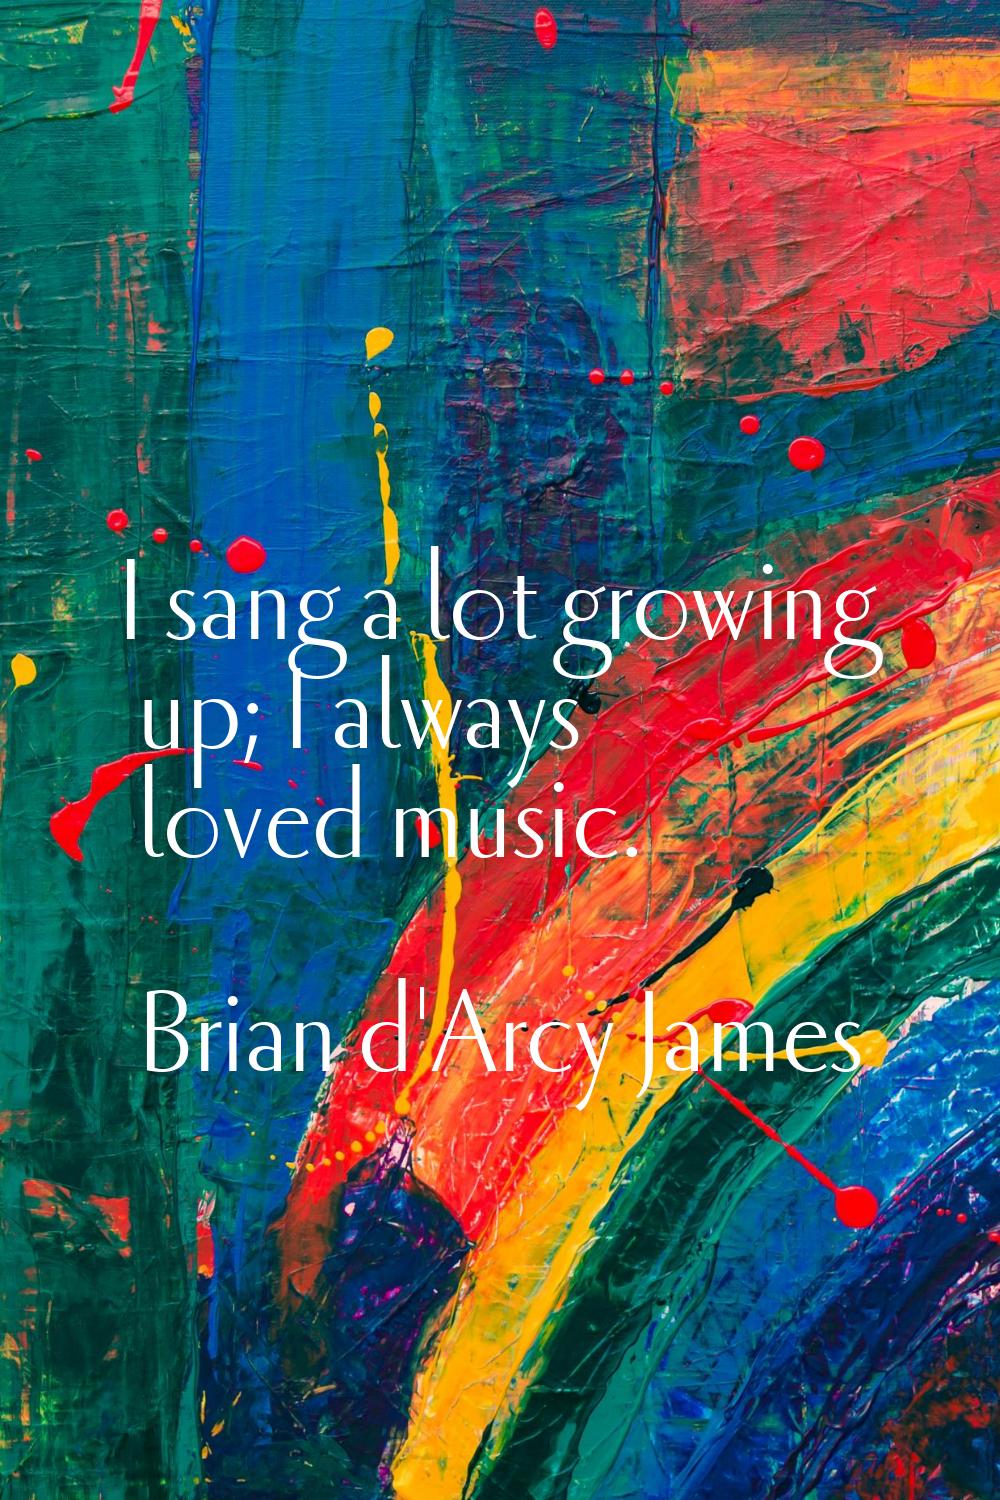 I sang a lot growing up; I always loved music.